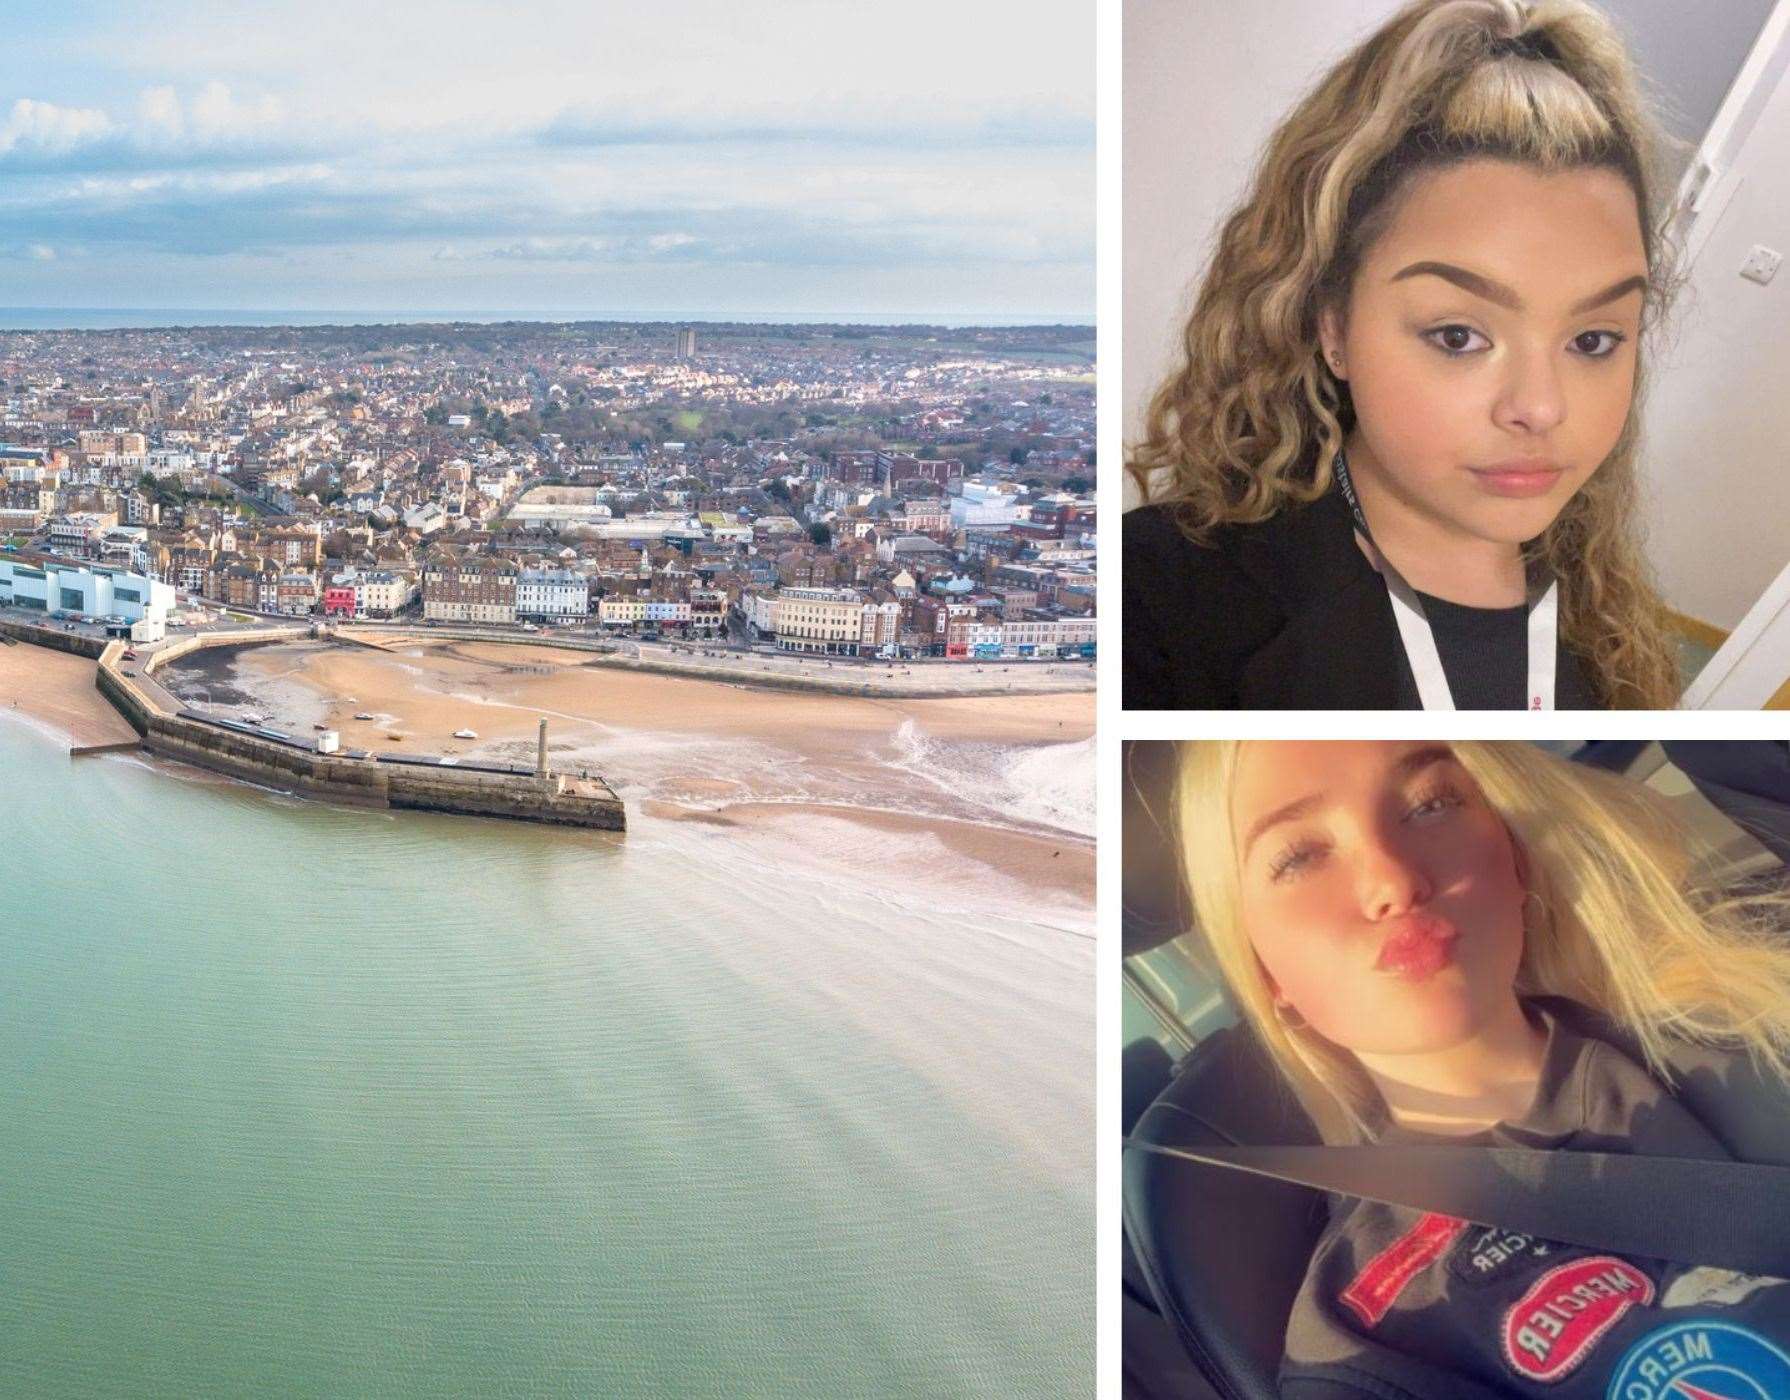 Four girls from Thanet saved a man's life on Margate beach